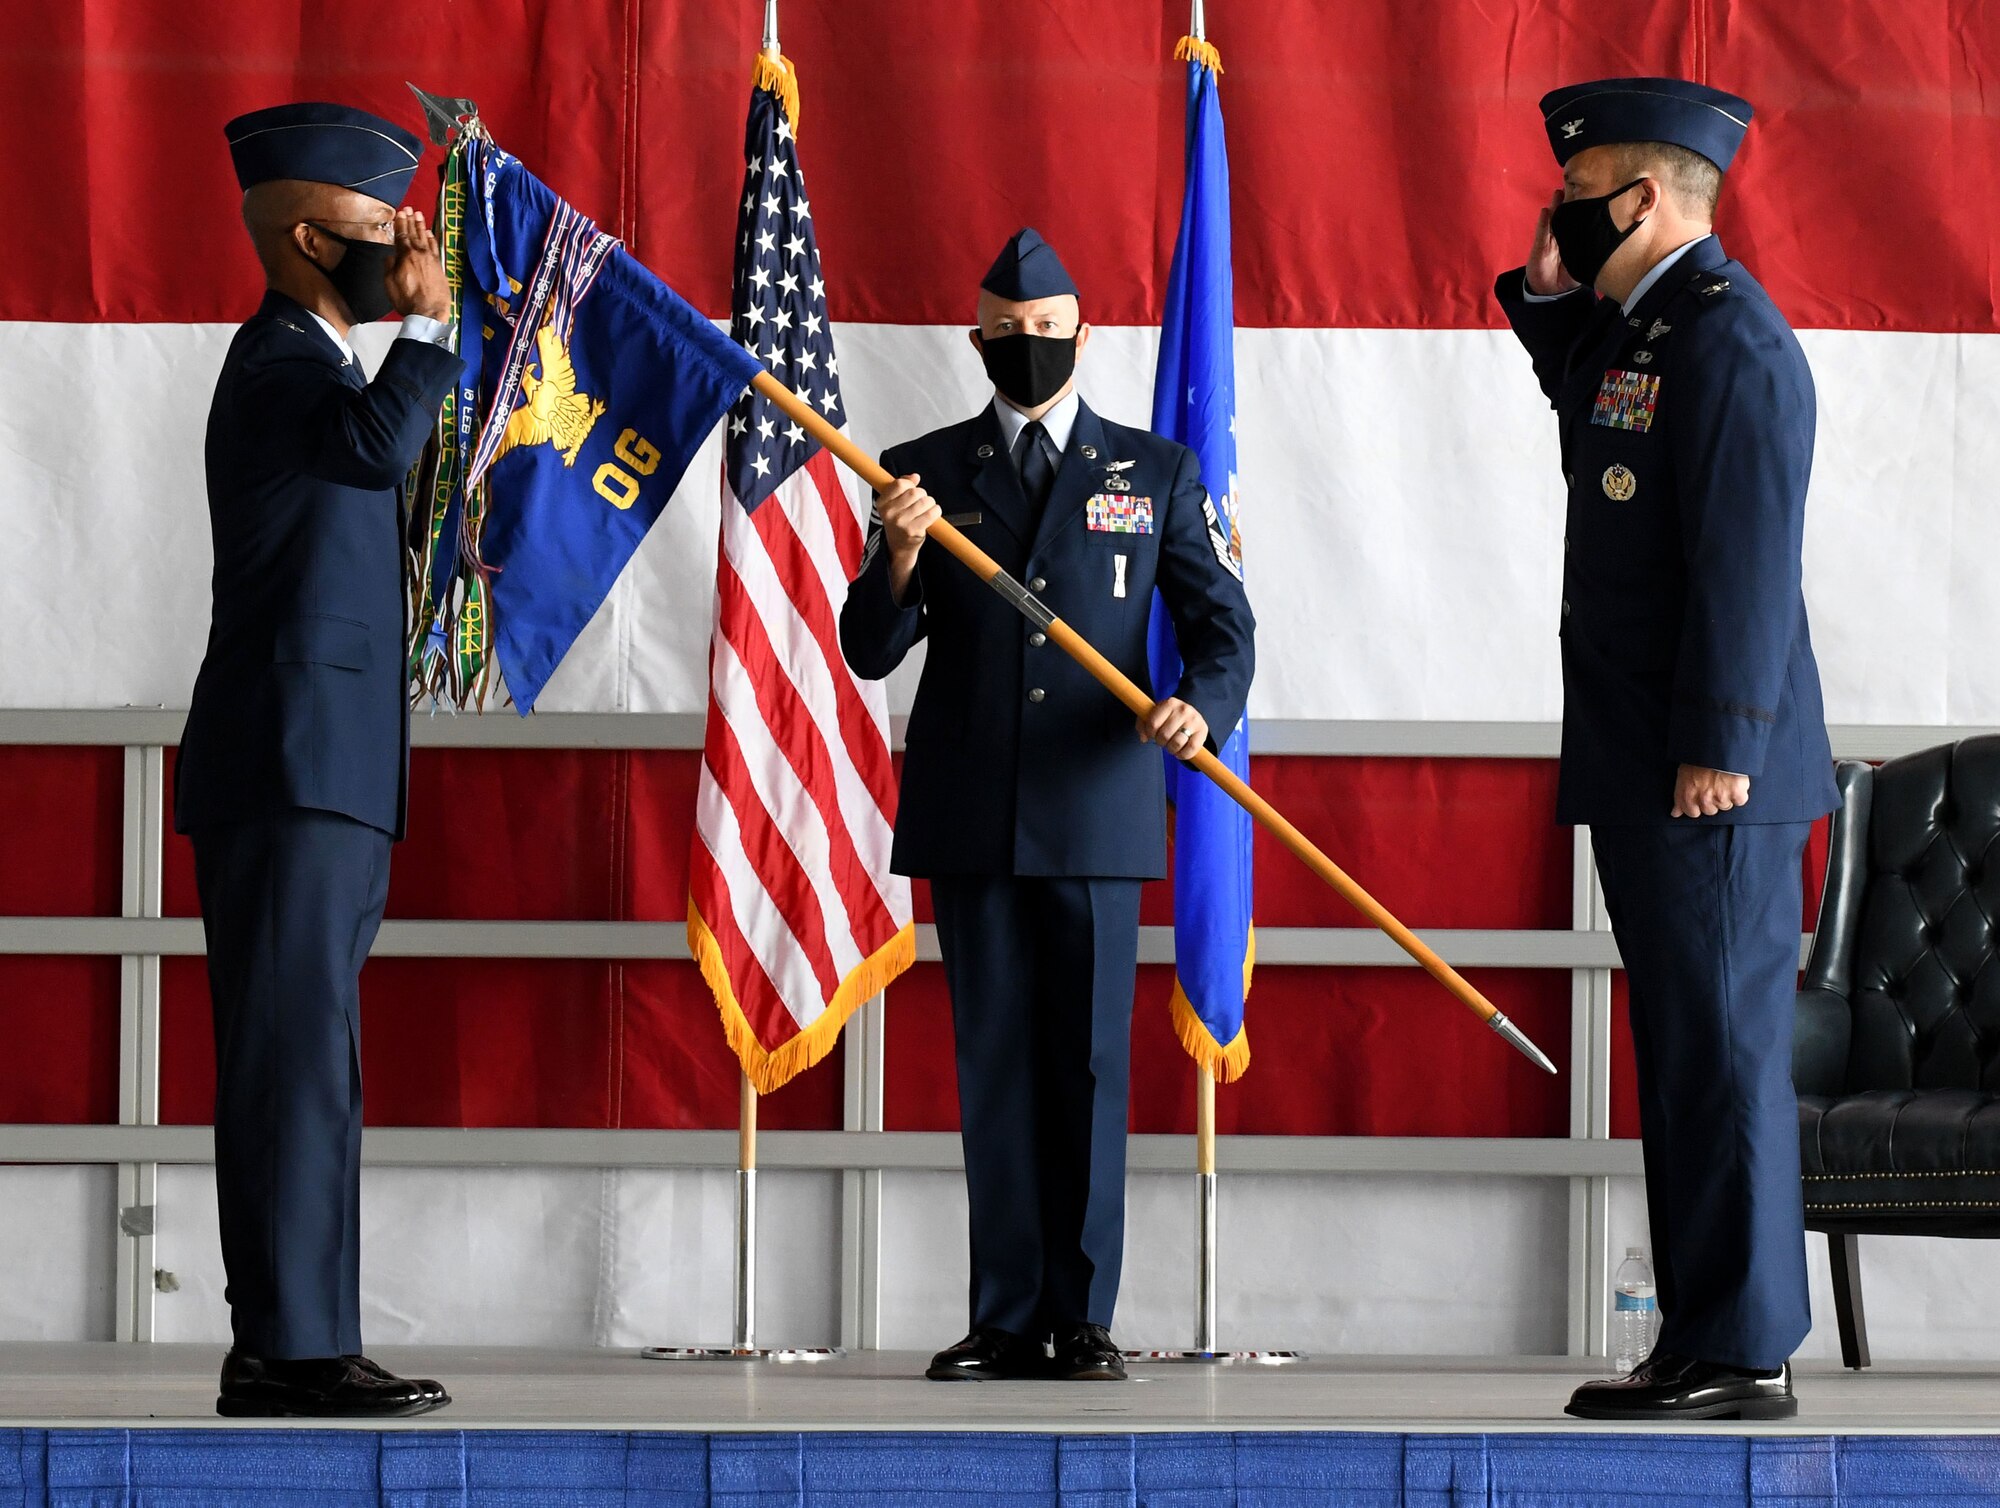 Two Airmen salute each other while a third looks on holding a guideon